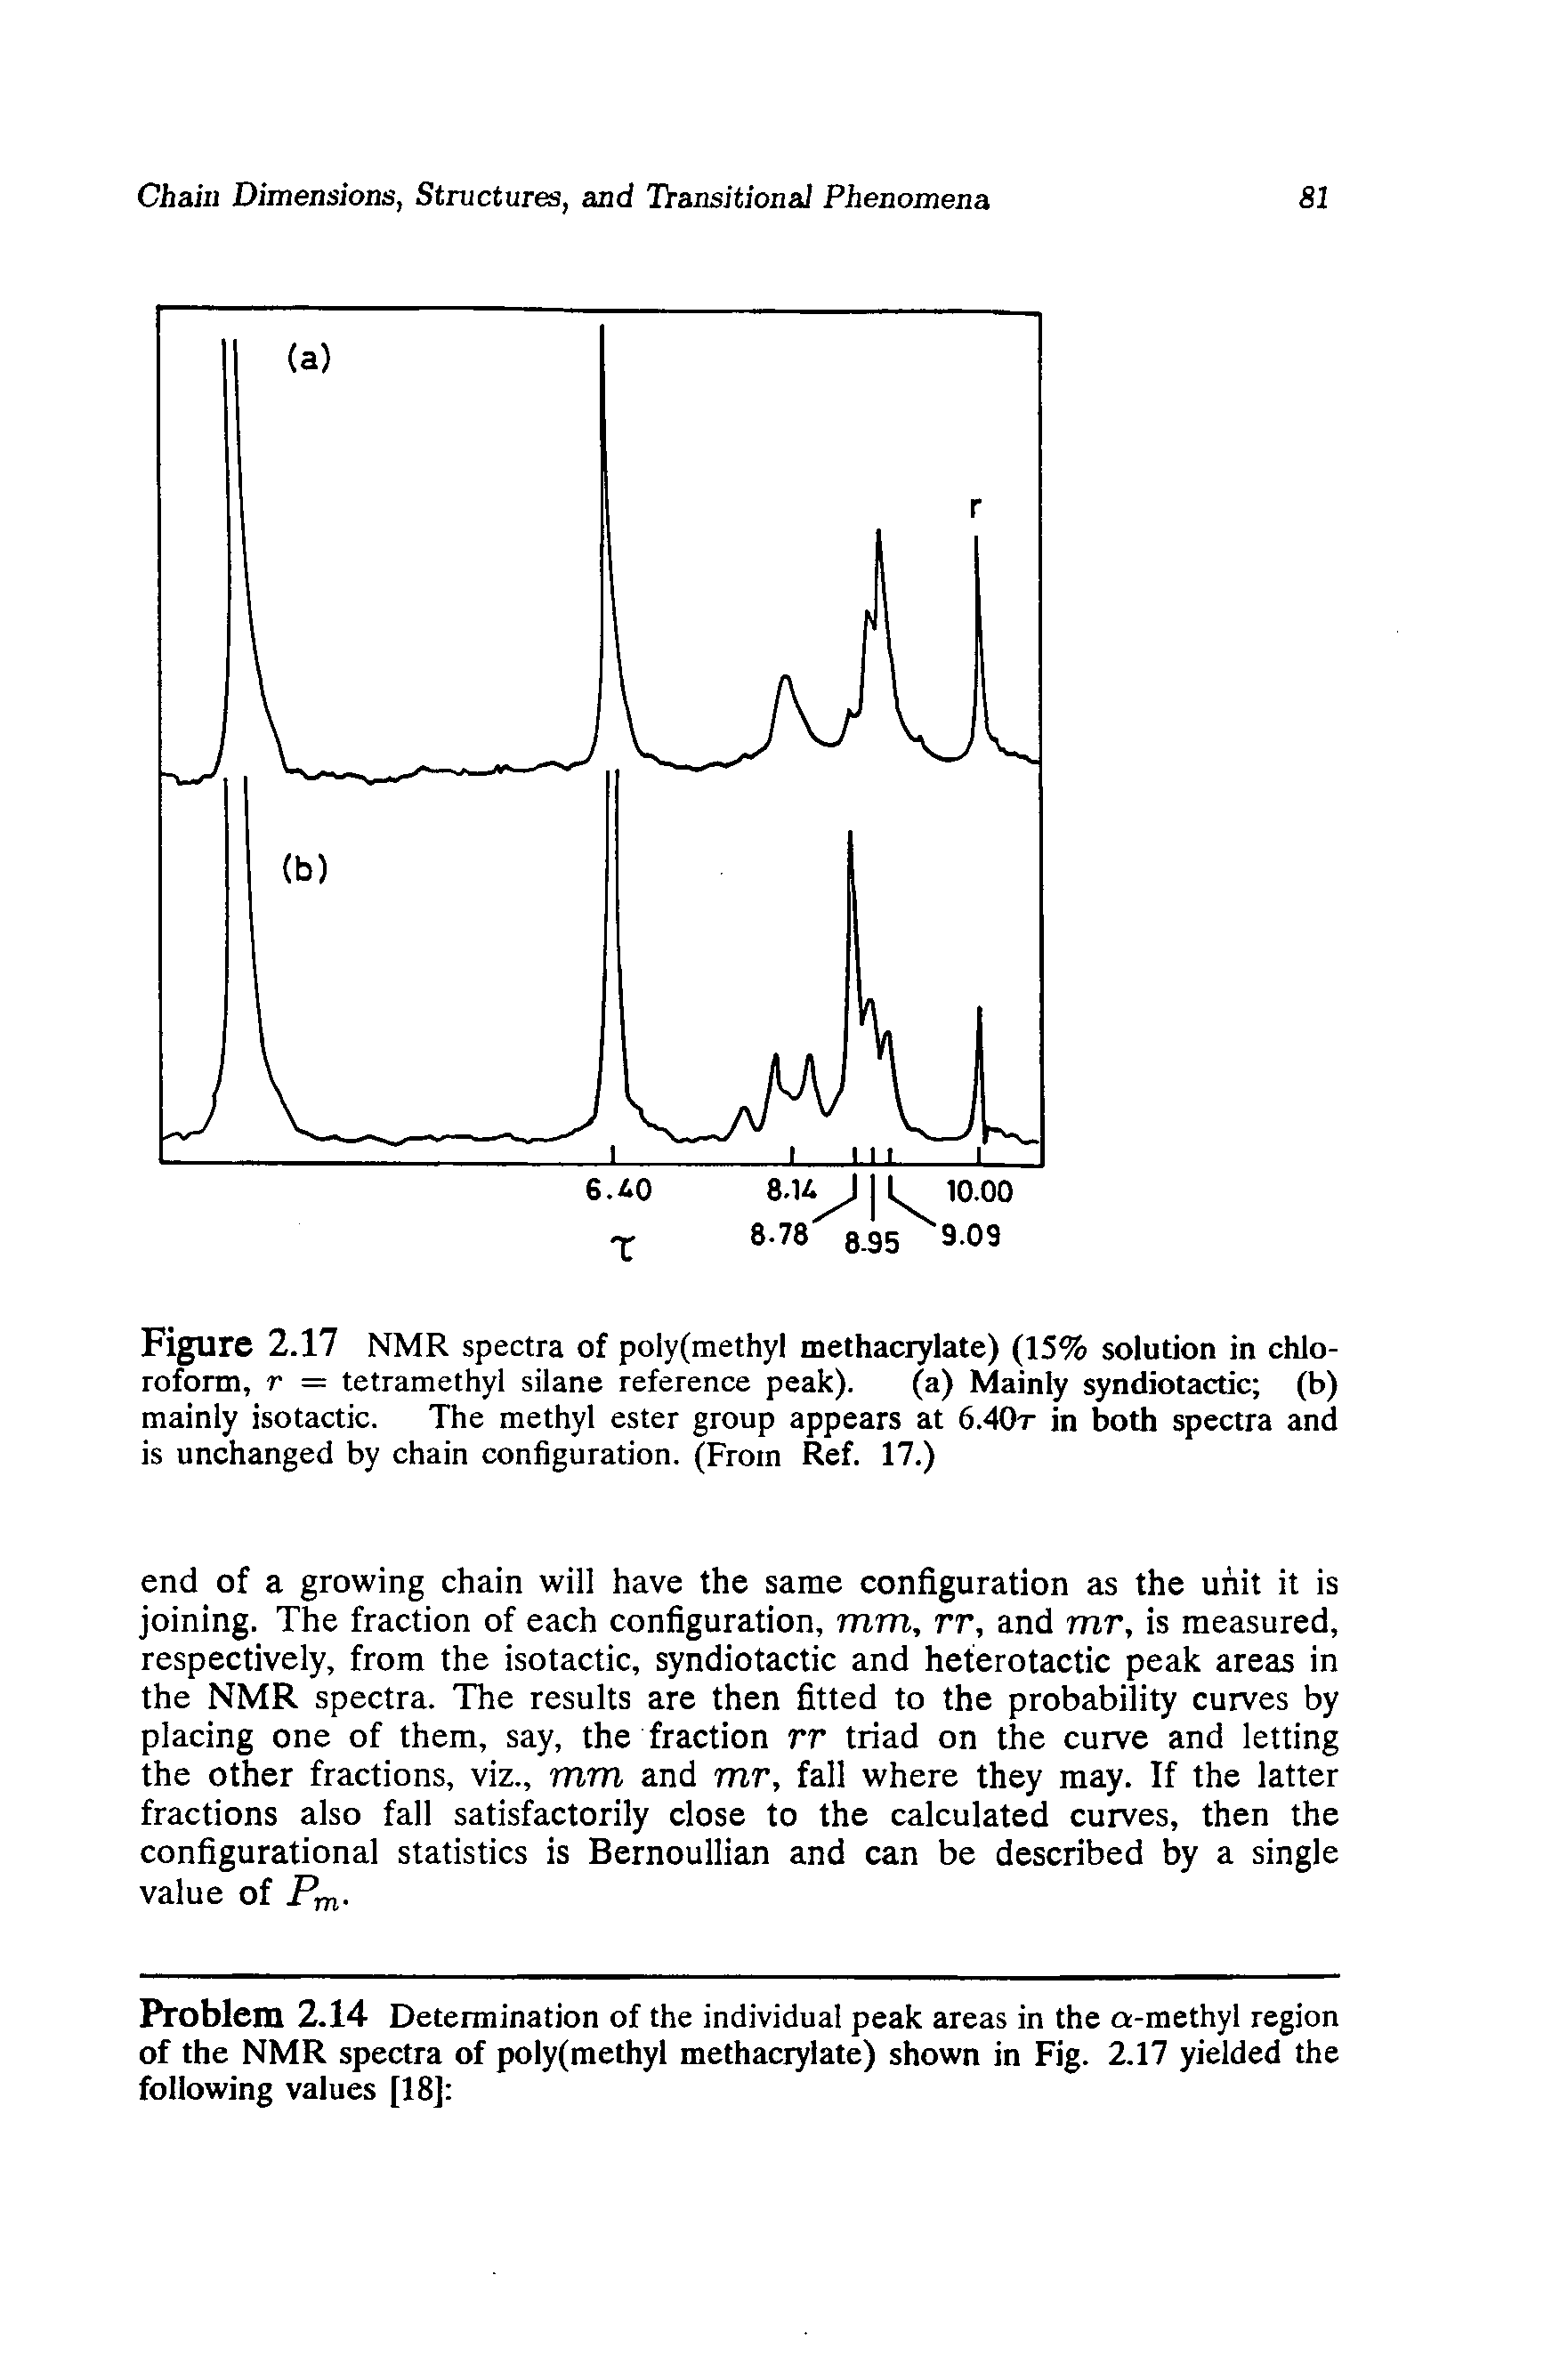 Figure 2.17 NMR spectra of poly(methyl methacrylate) (15% solution in chloroform, r = tetramethyl silane reference peak). (a) Mainly syndiotactic (b) mainly isotactic. The methyl ester group appears at 6.40t in both spectra and is unchanged by chain configuration. (From Ref. 17.)...